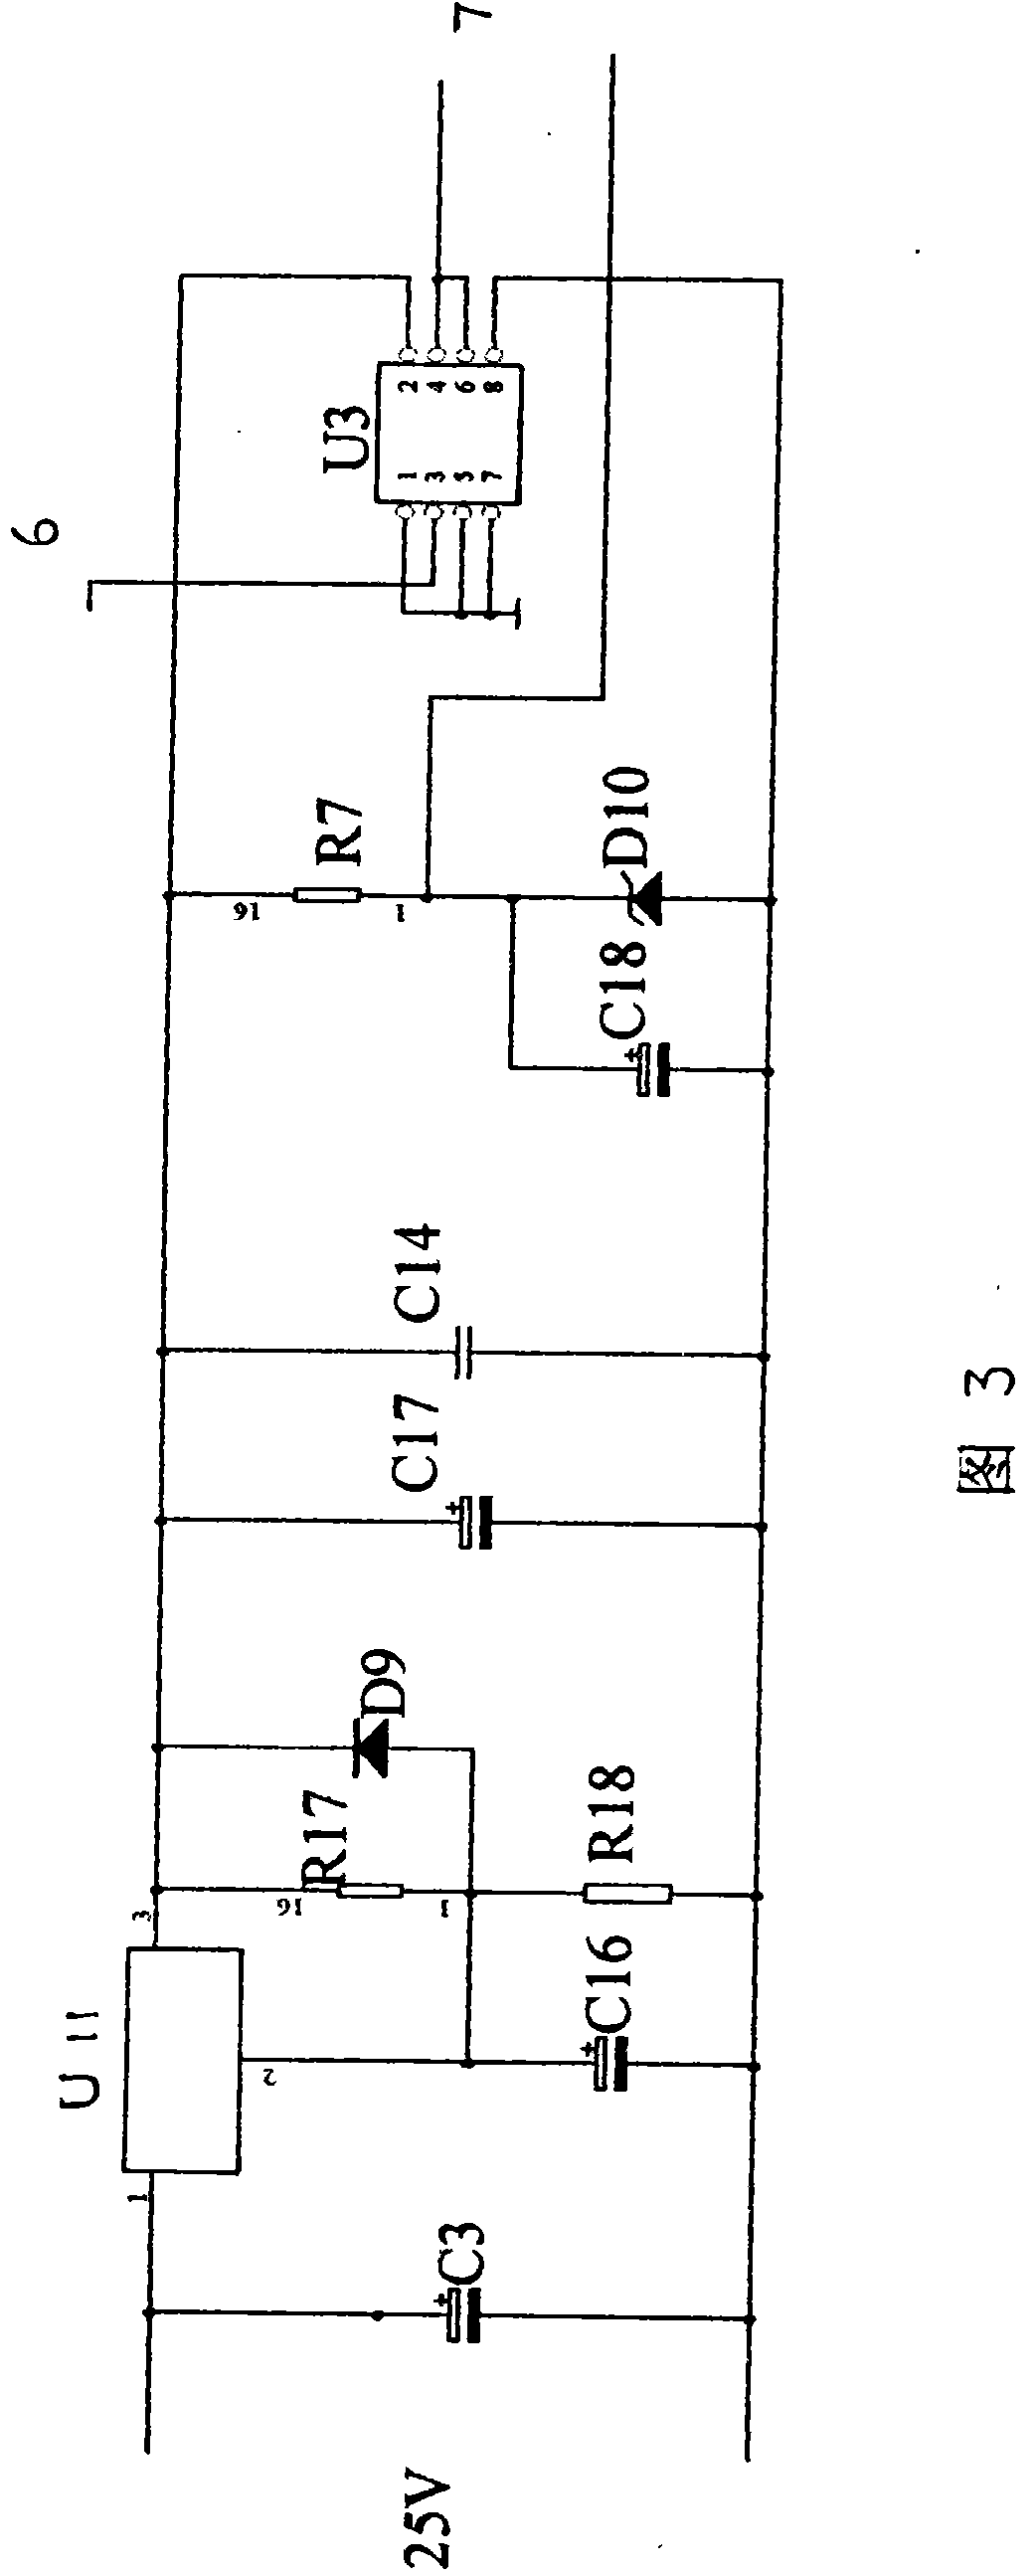 Induction heating power supply circuit